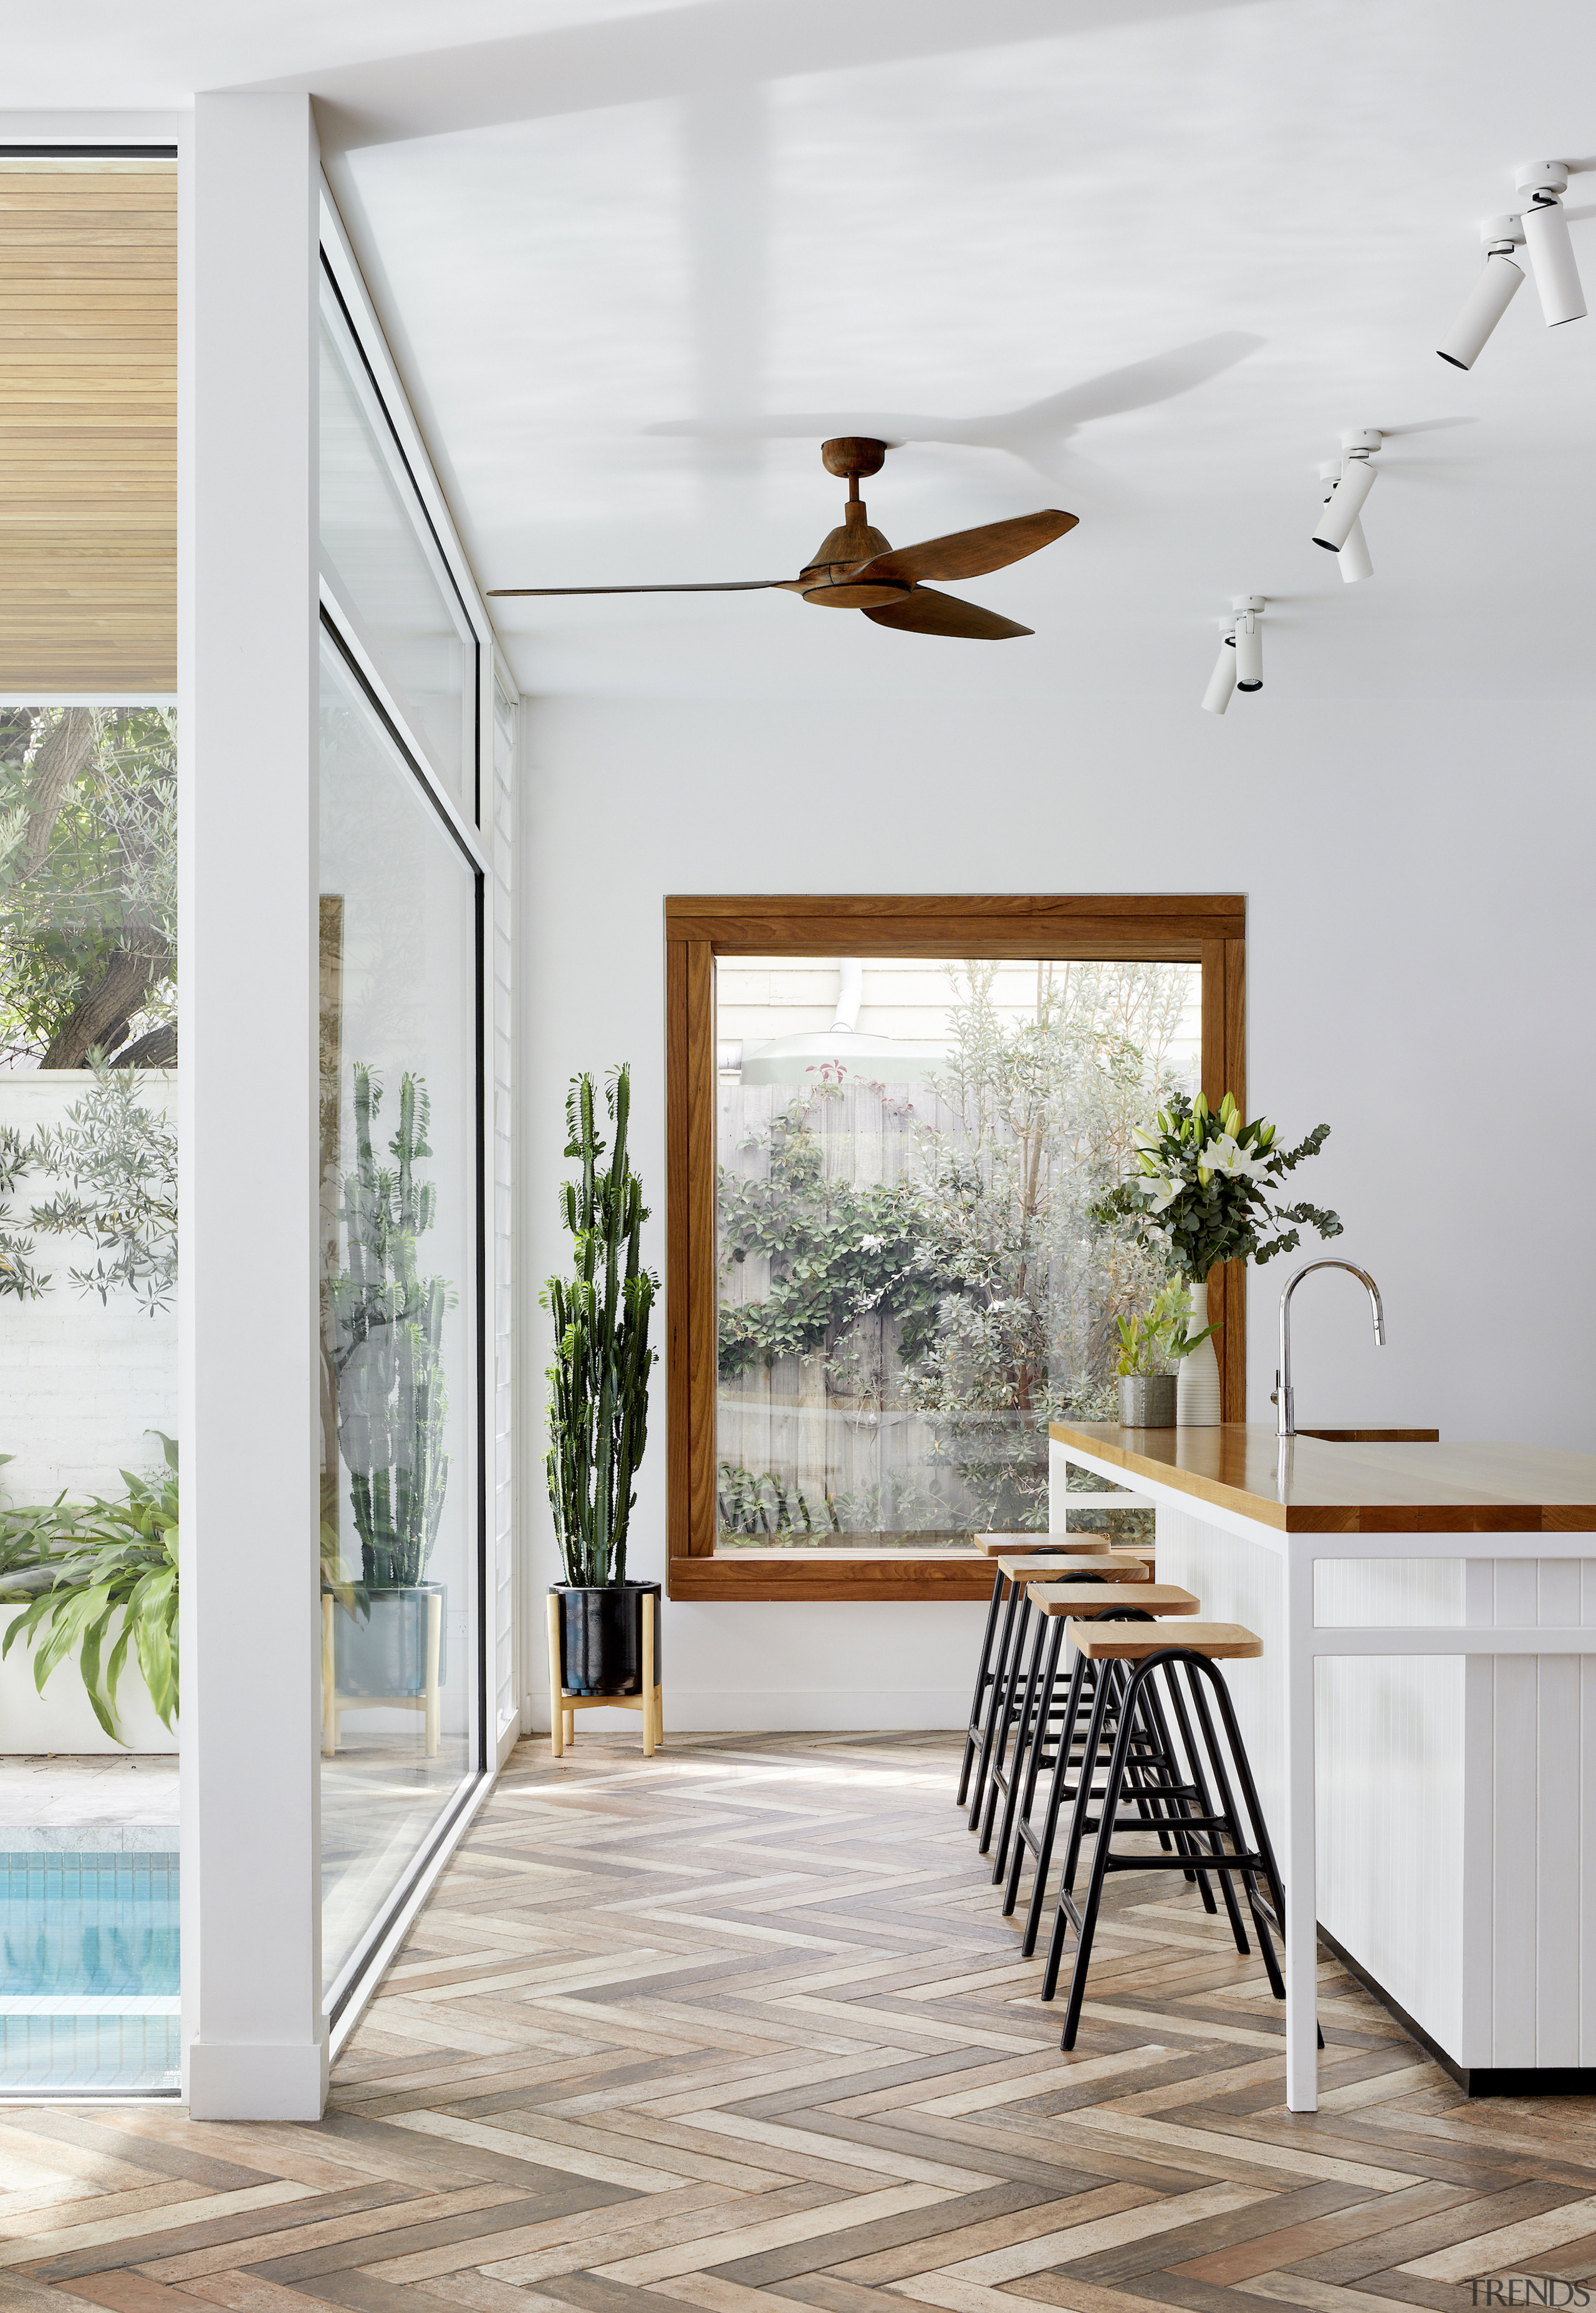 Connections with the outdoors are bolstered with expansive 